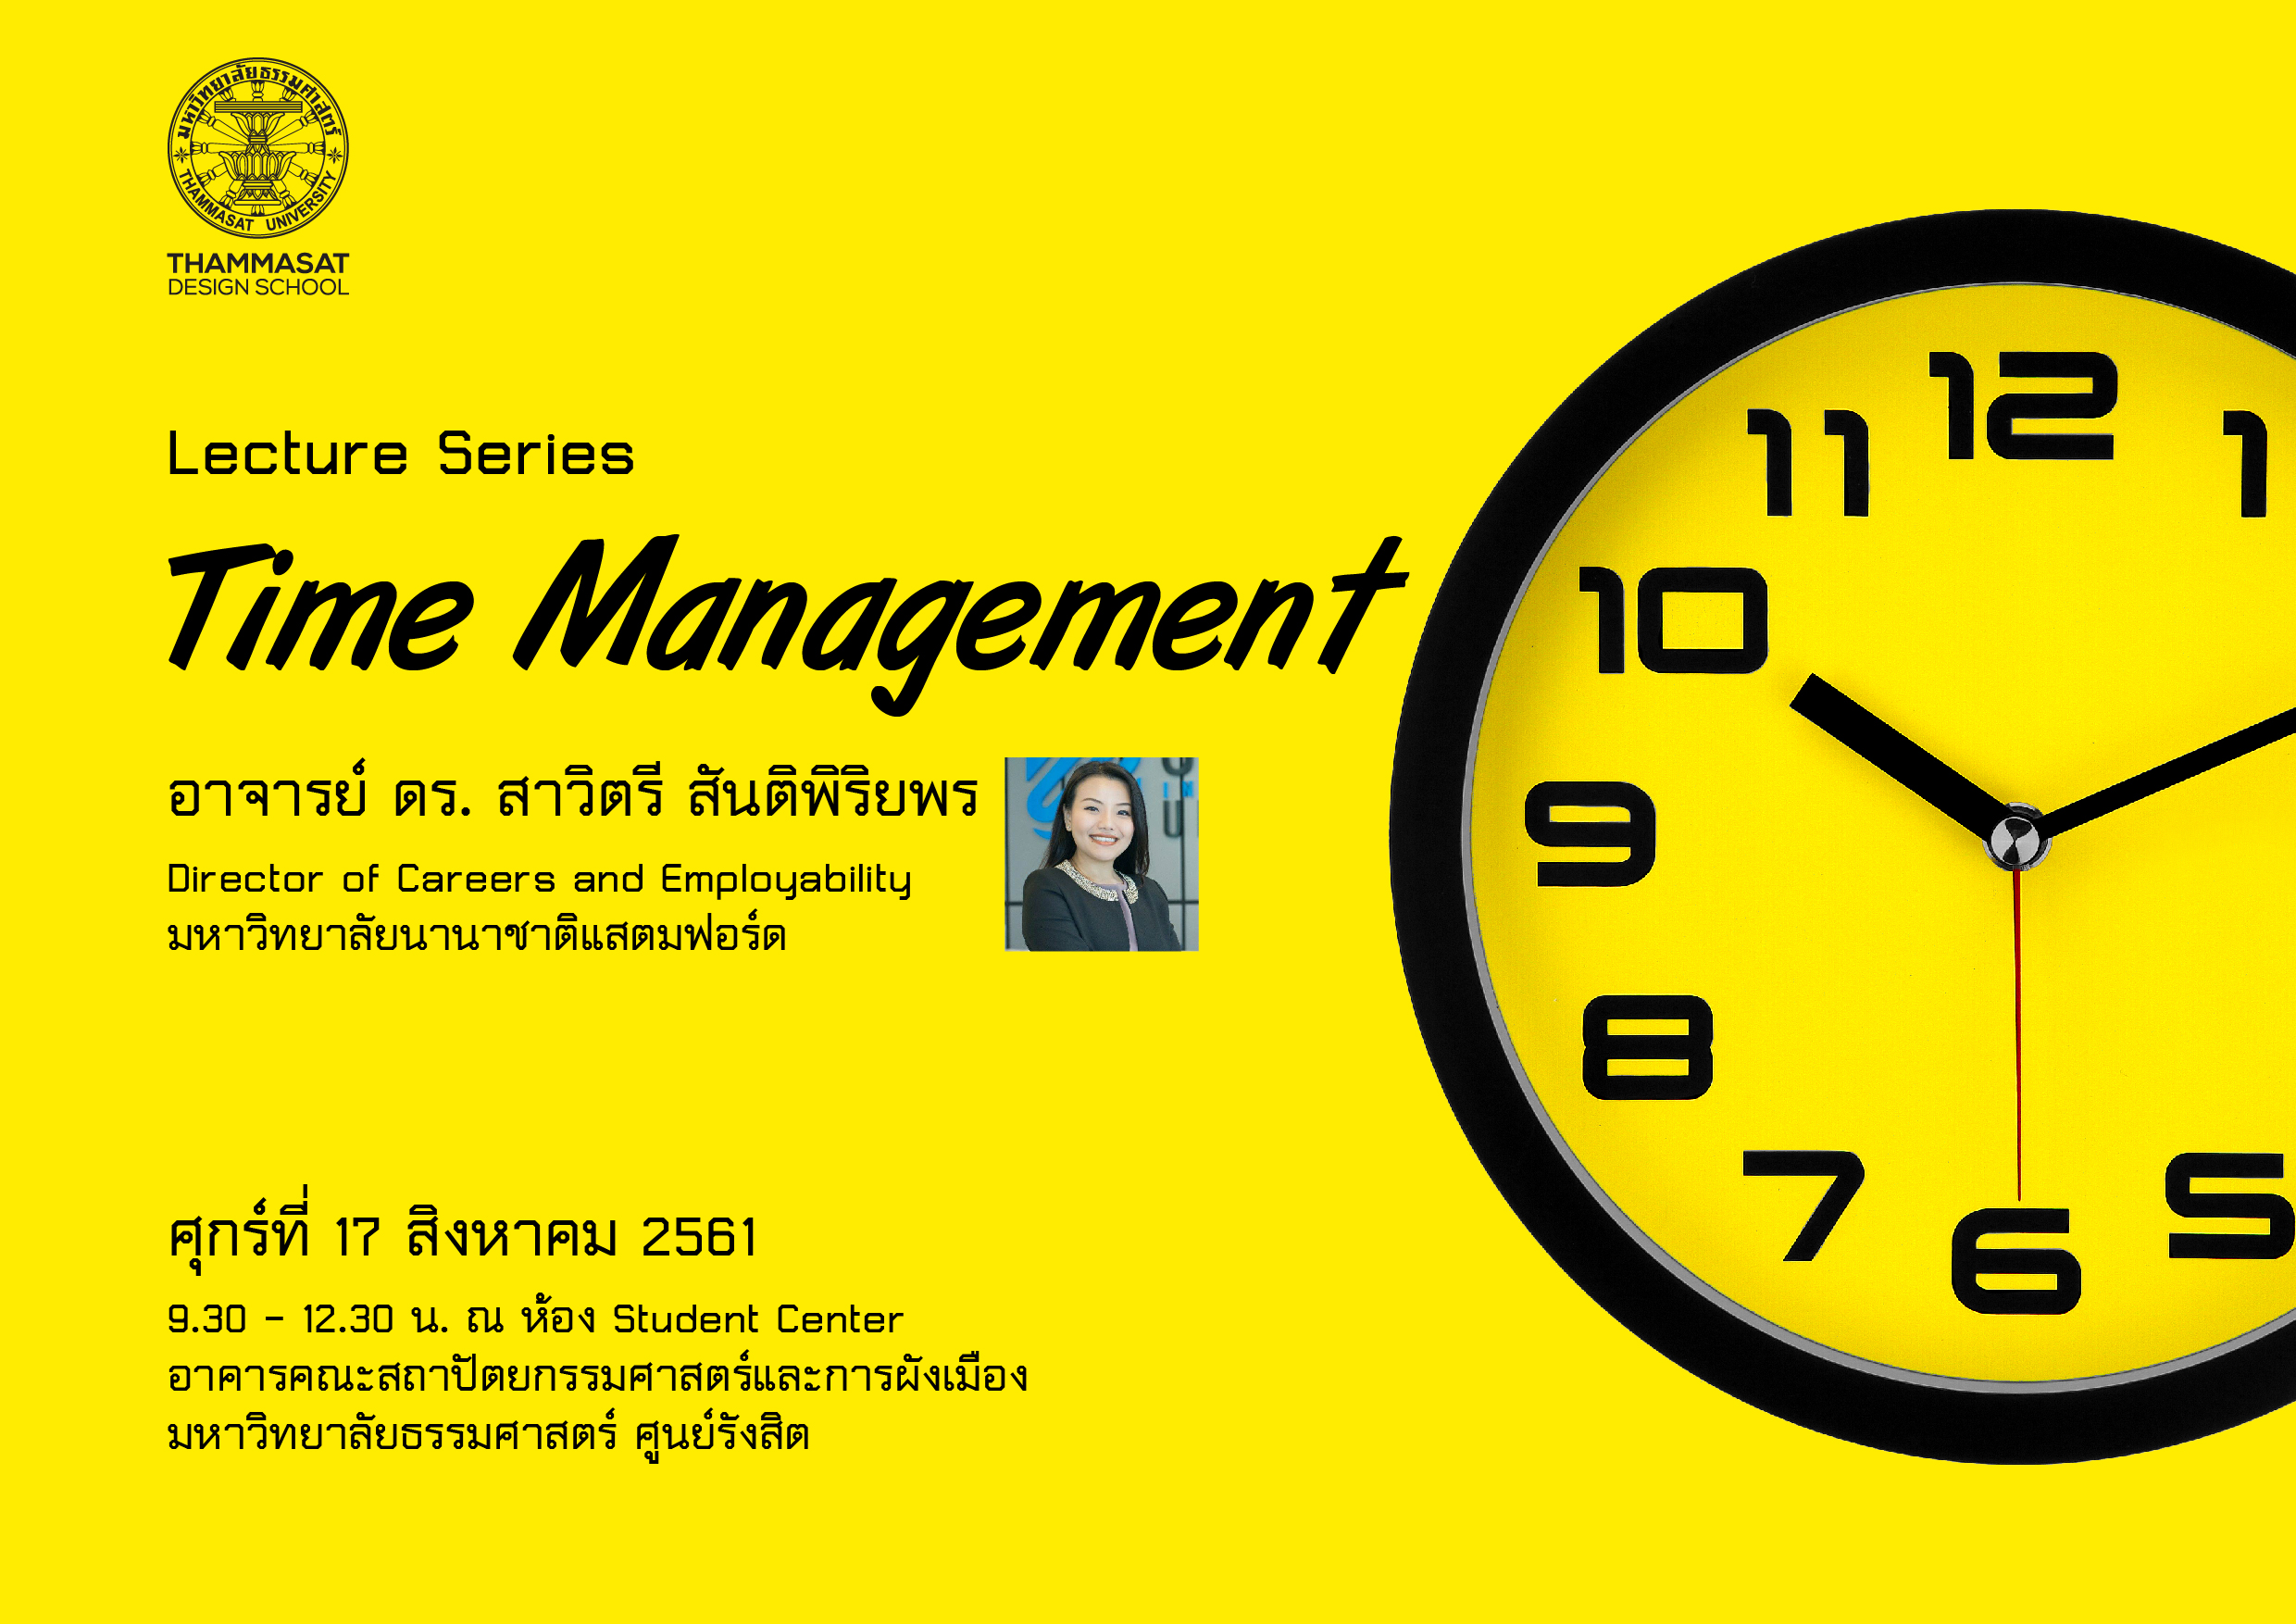 https://www.tds.tu.ac.th/lecture-series-time-management/